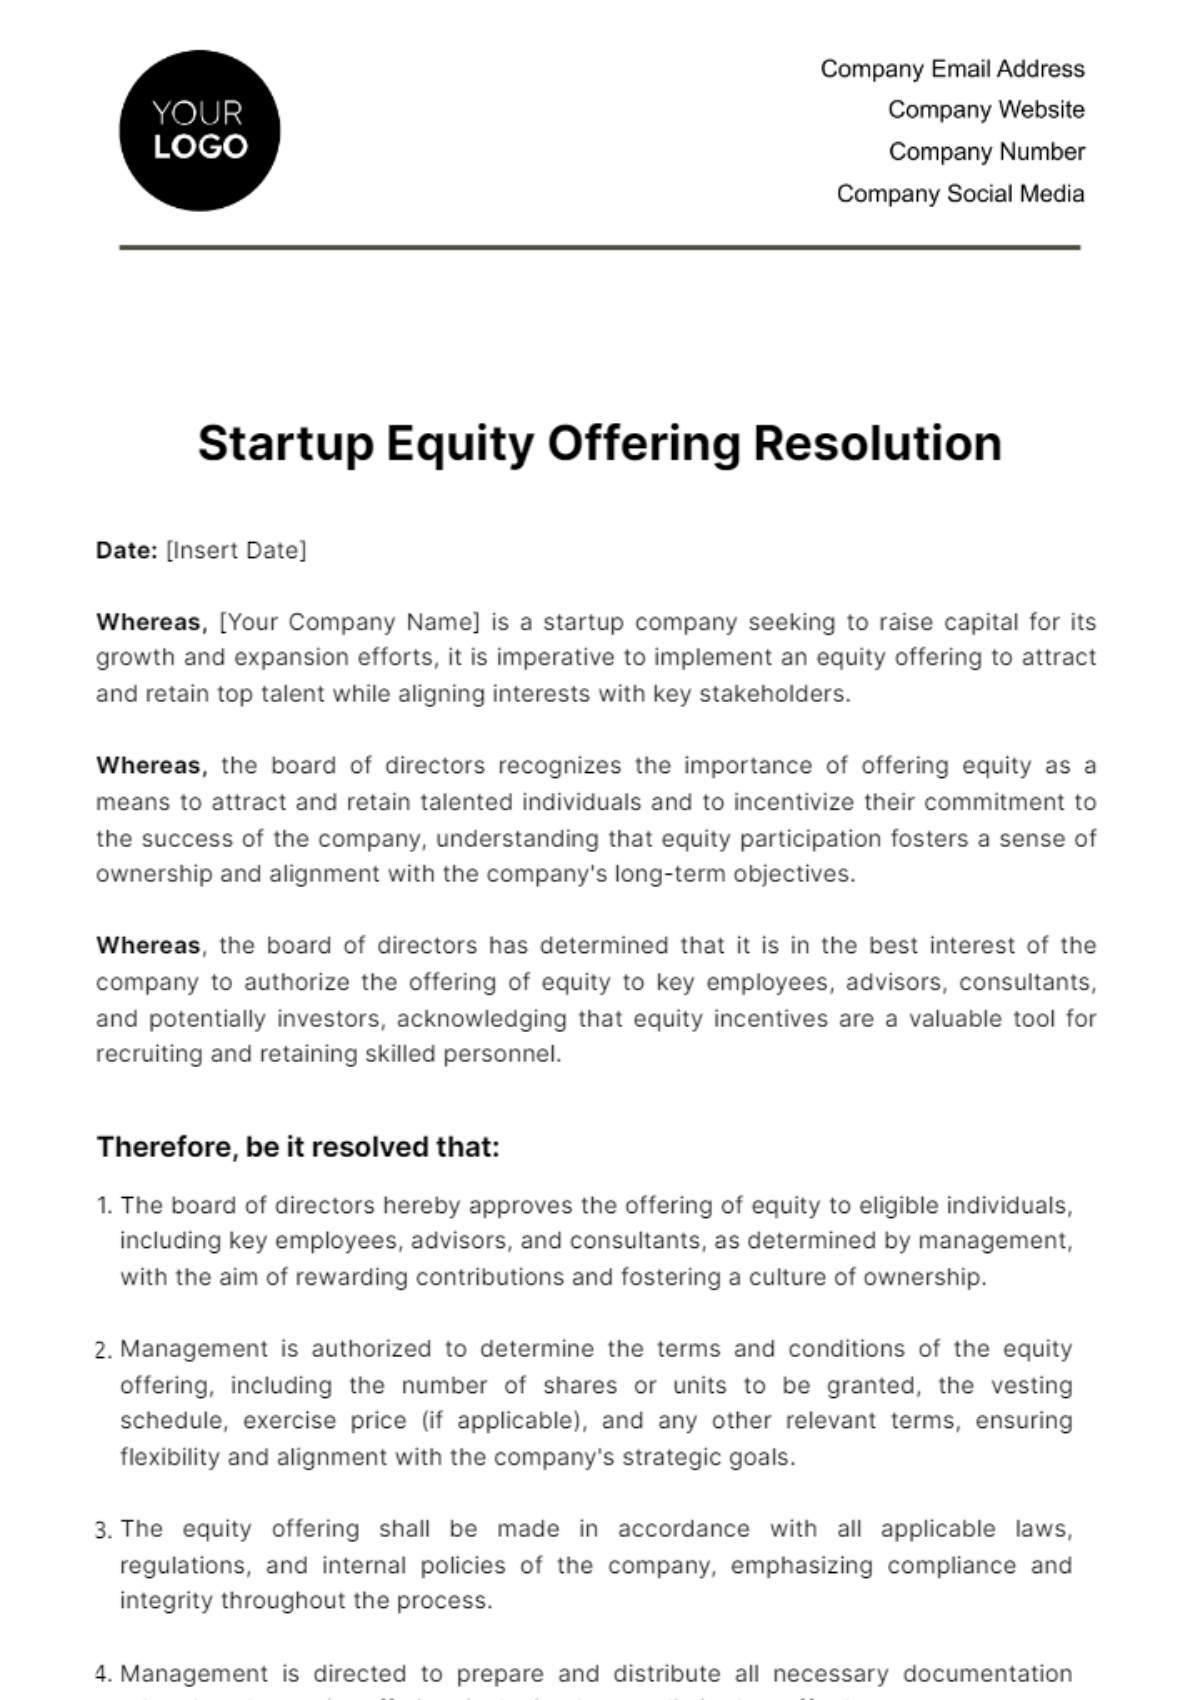 Startup Equity Offering Resolution Template